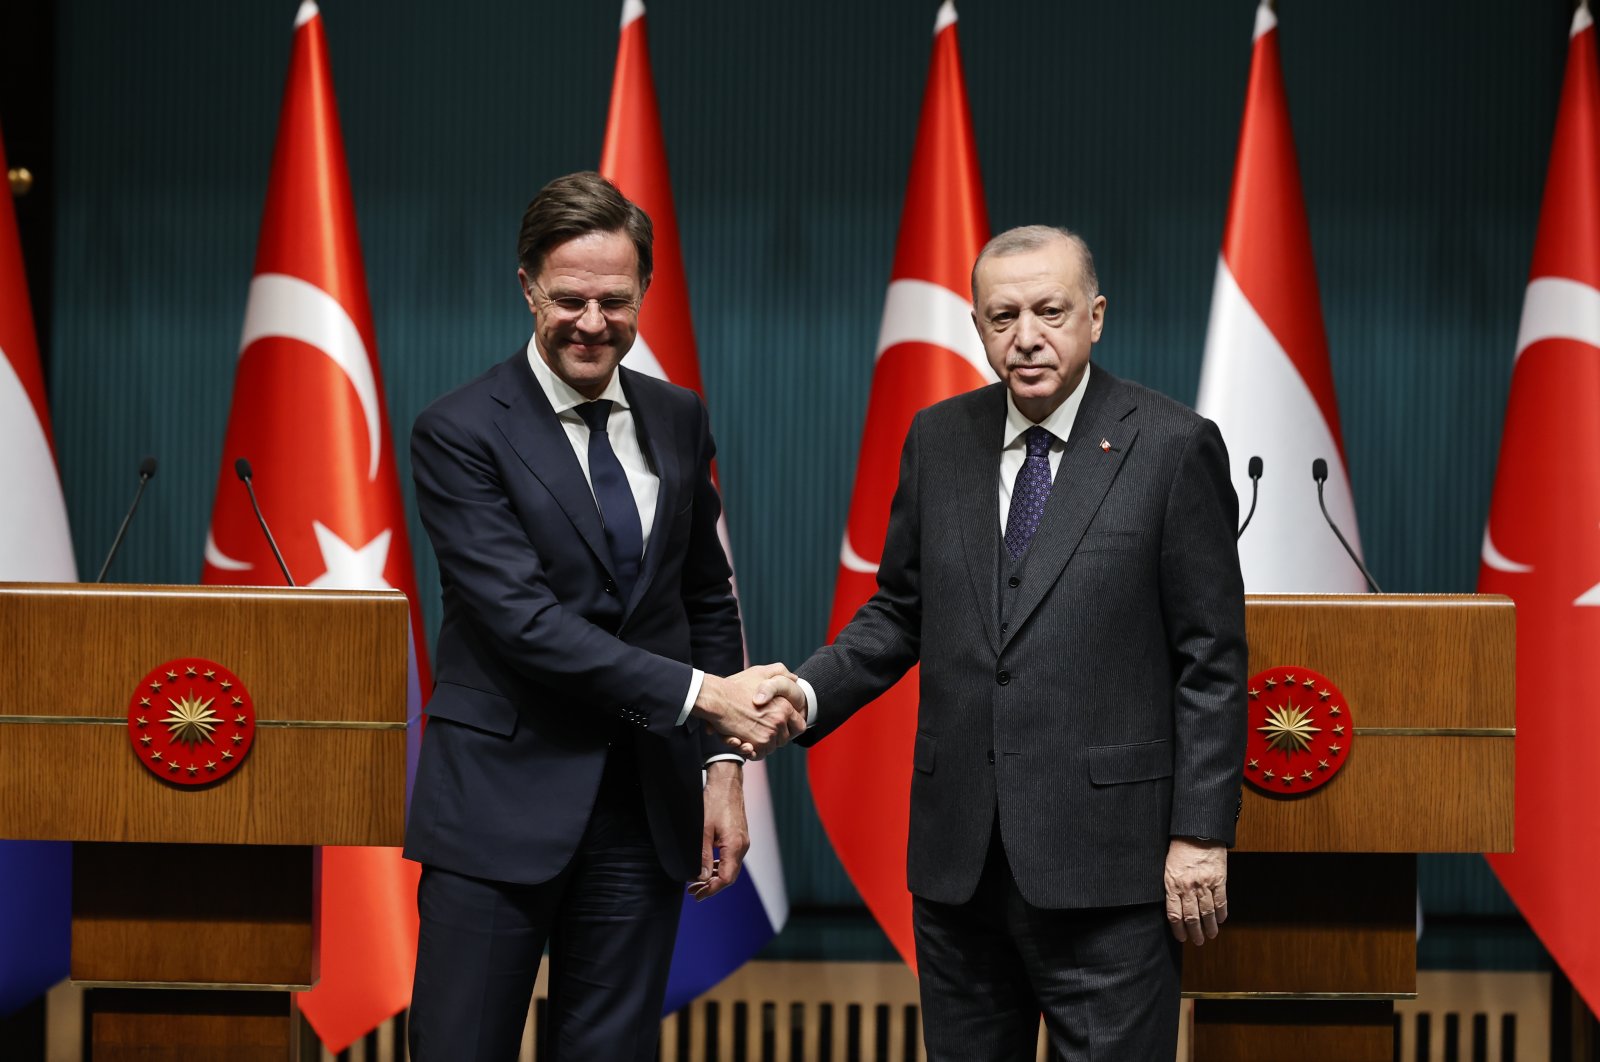 President Recep Tayyip Erdoğan (R) and Dutch Prime Minister Mark Rutte shake hands at a joint press conference after their meeting in the capital Ankara, Turkey, March 22, 2022. (AA Photo)